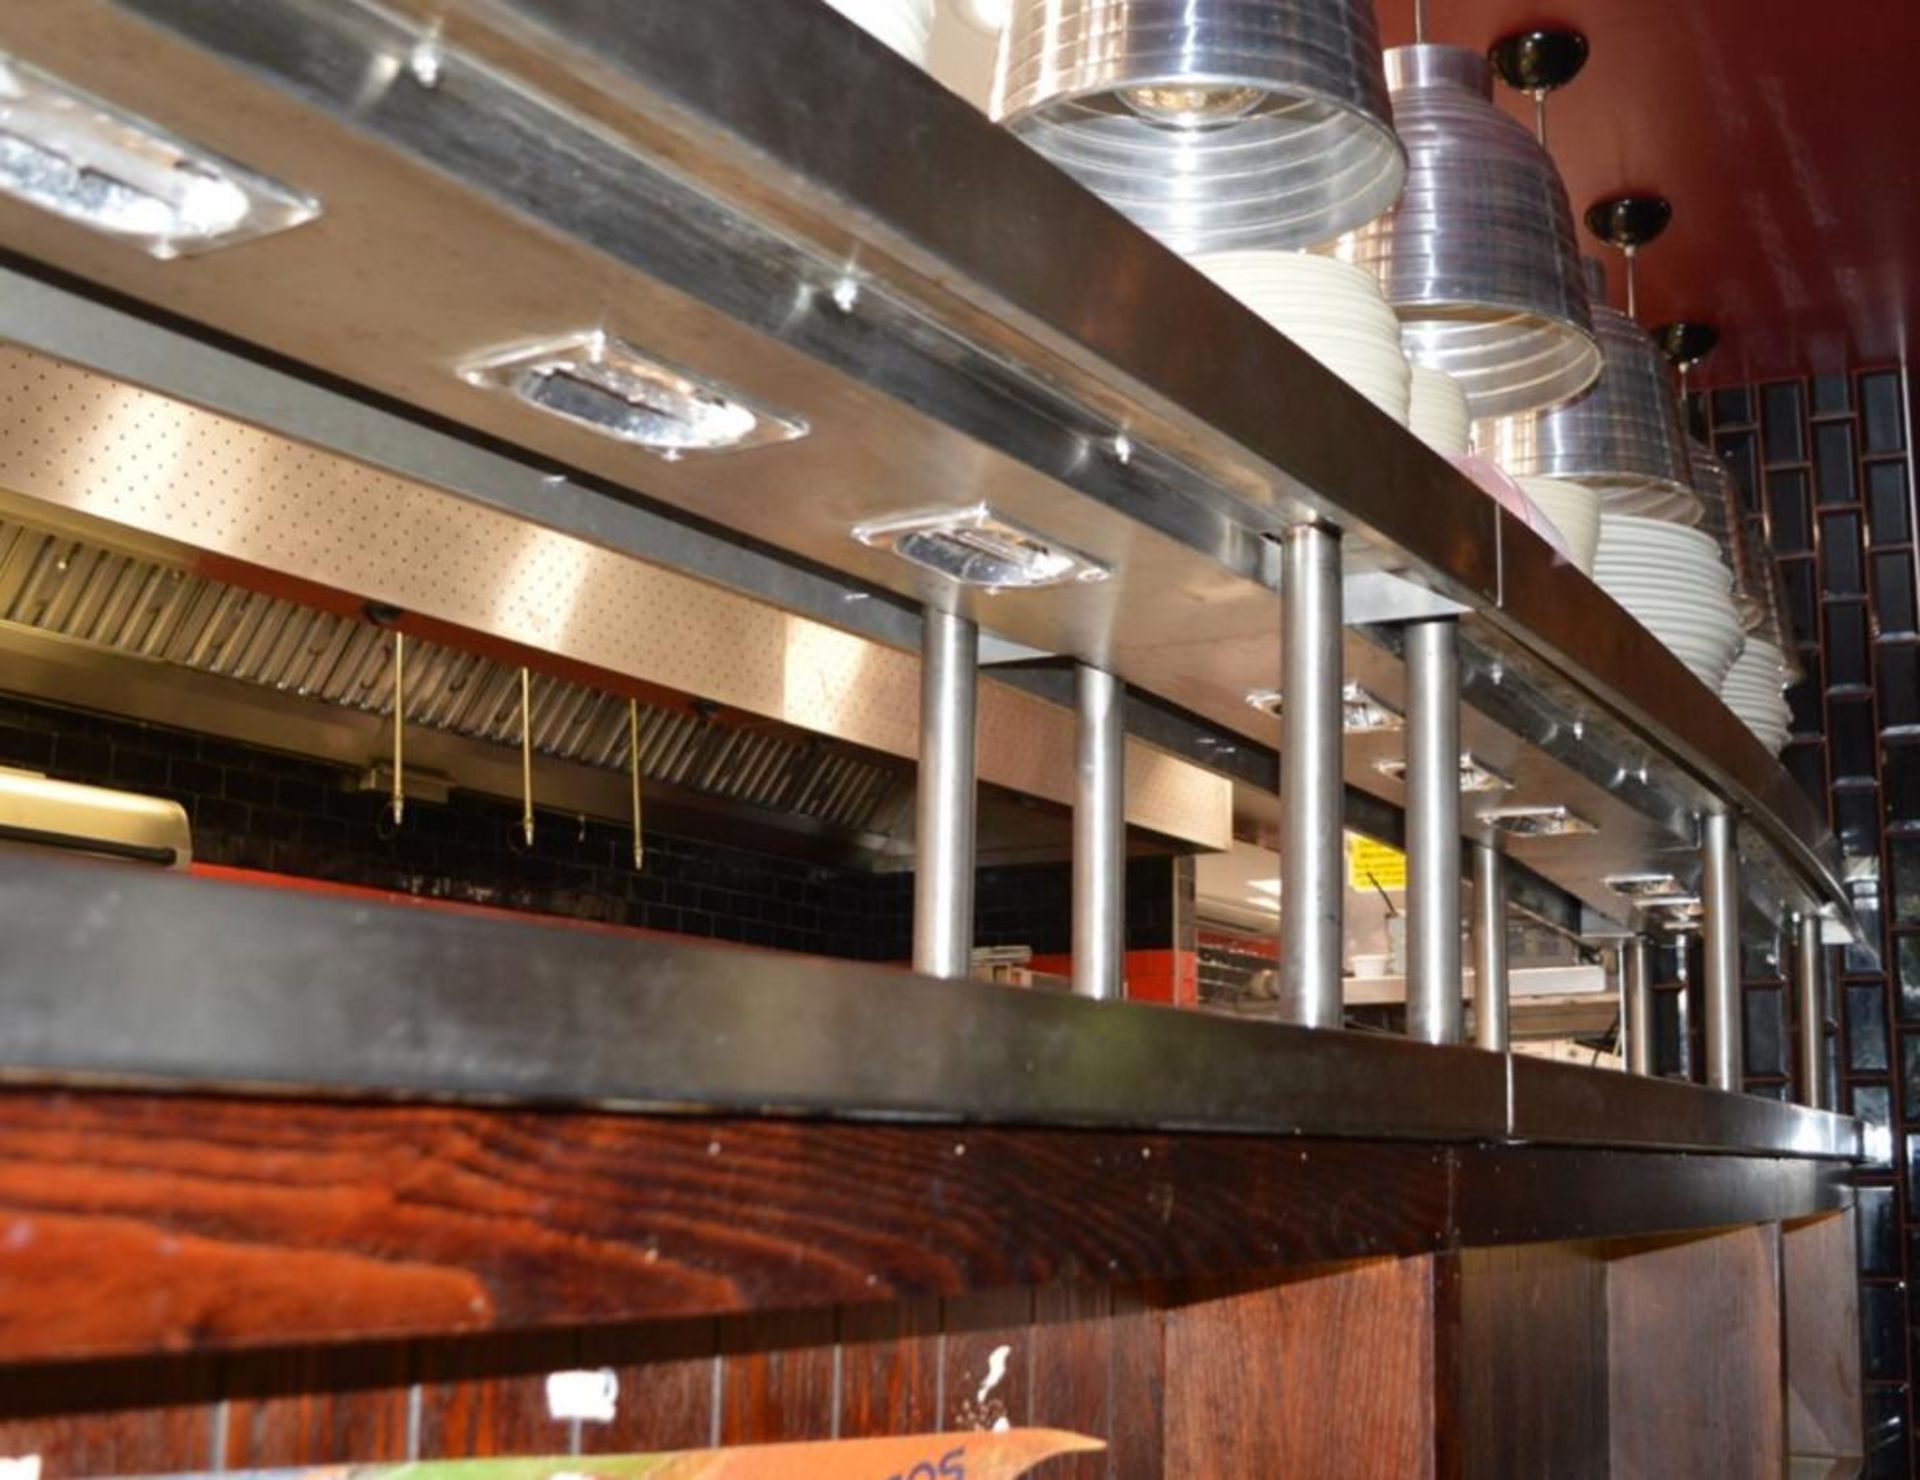 1 x Restaurant Food Collection Gantry Partition With Illuminated Display Shelves and Stainless Steel - Image 6 of 10